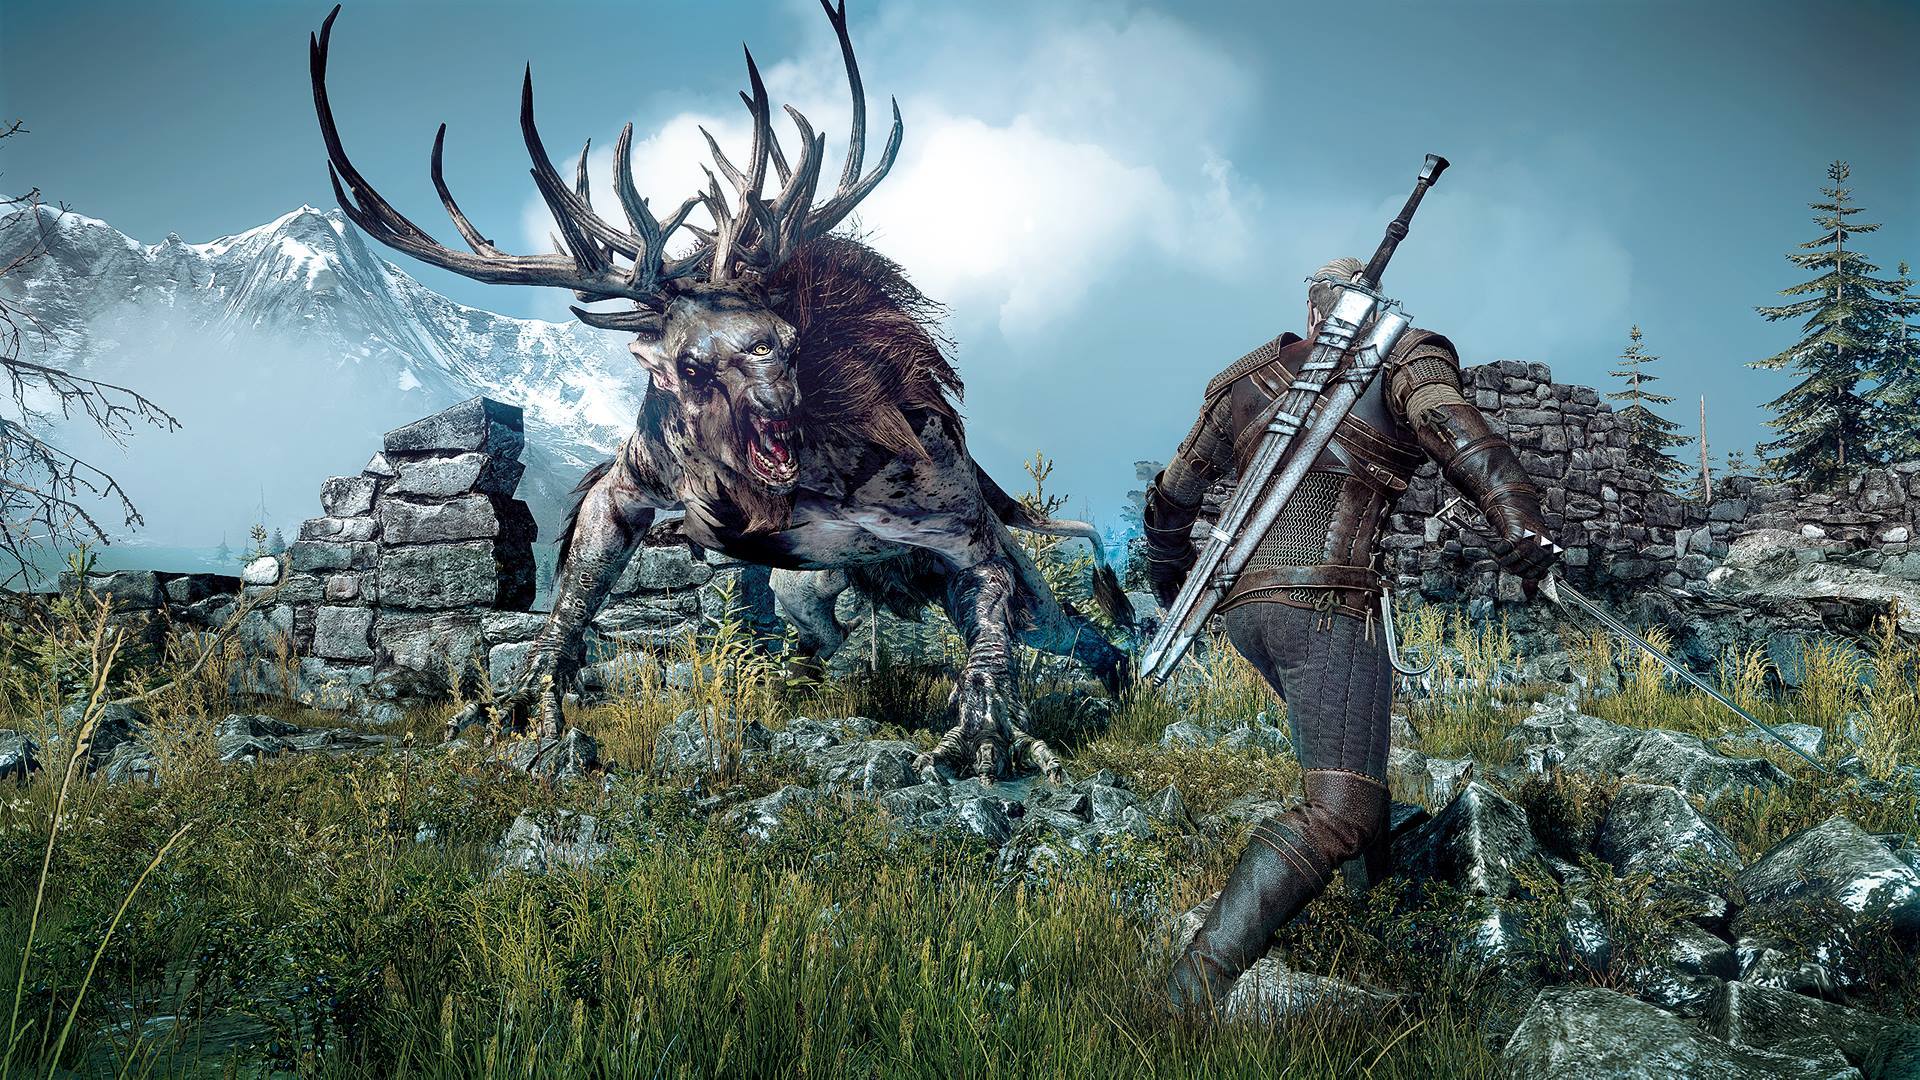 “The Witcher 3: Wild Hunt” Delayed Once More - Making Its Hunt in May